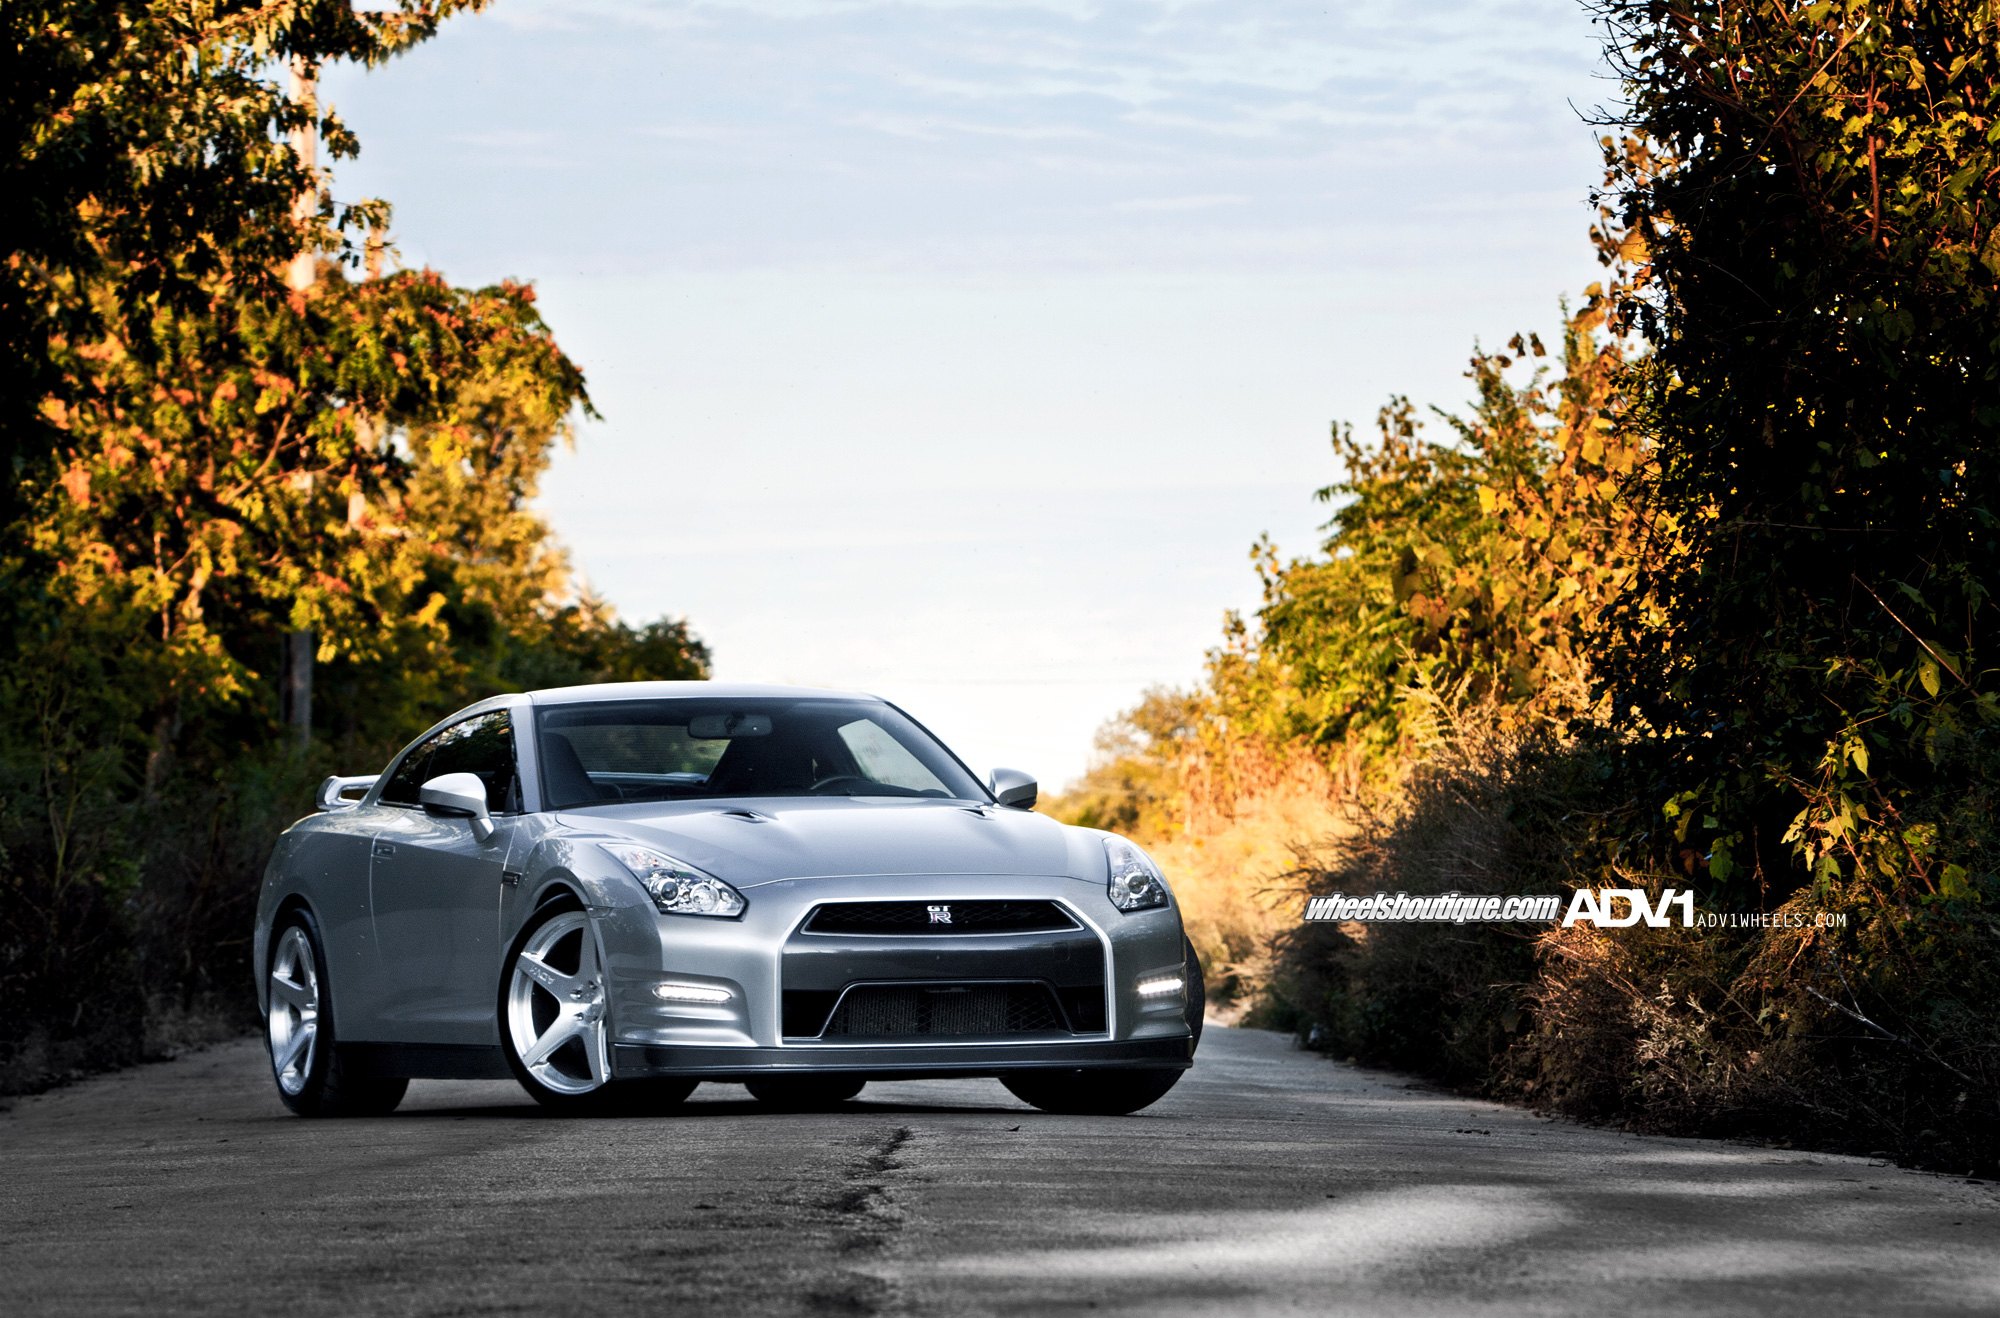 Crystal Clear LED Headlights on Silver Nissan GT-R - Photo by ADV.1